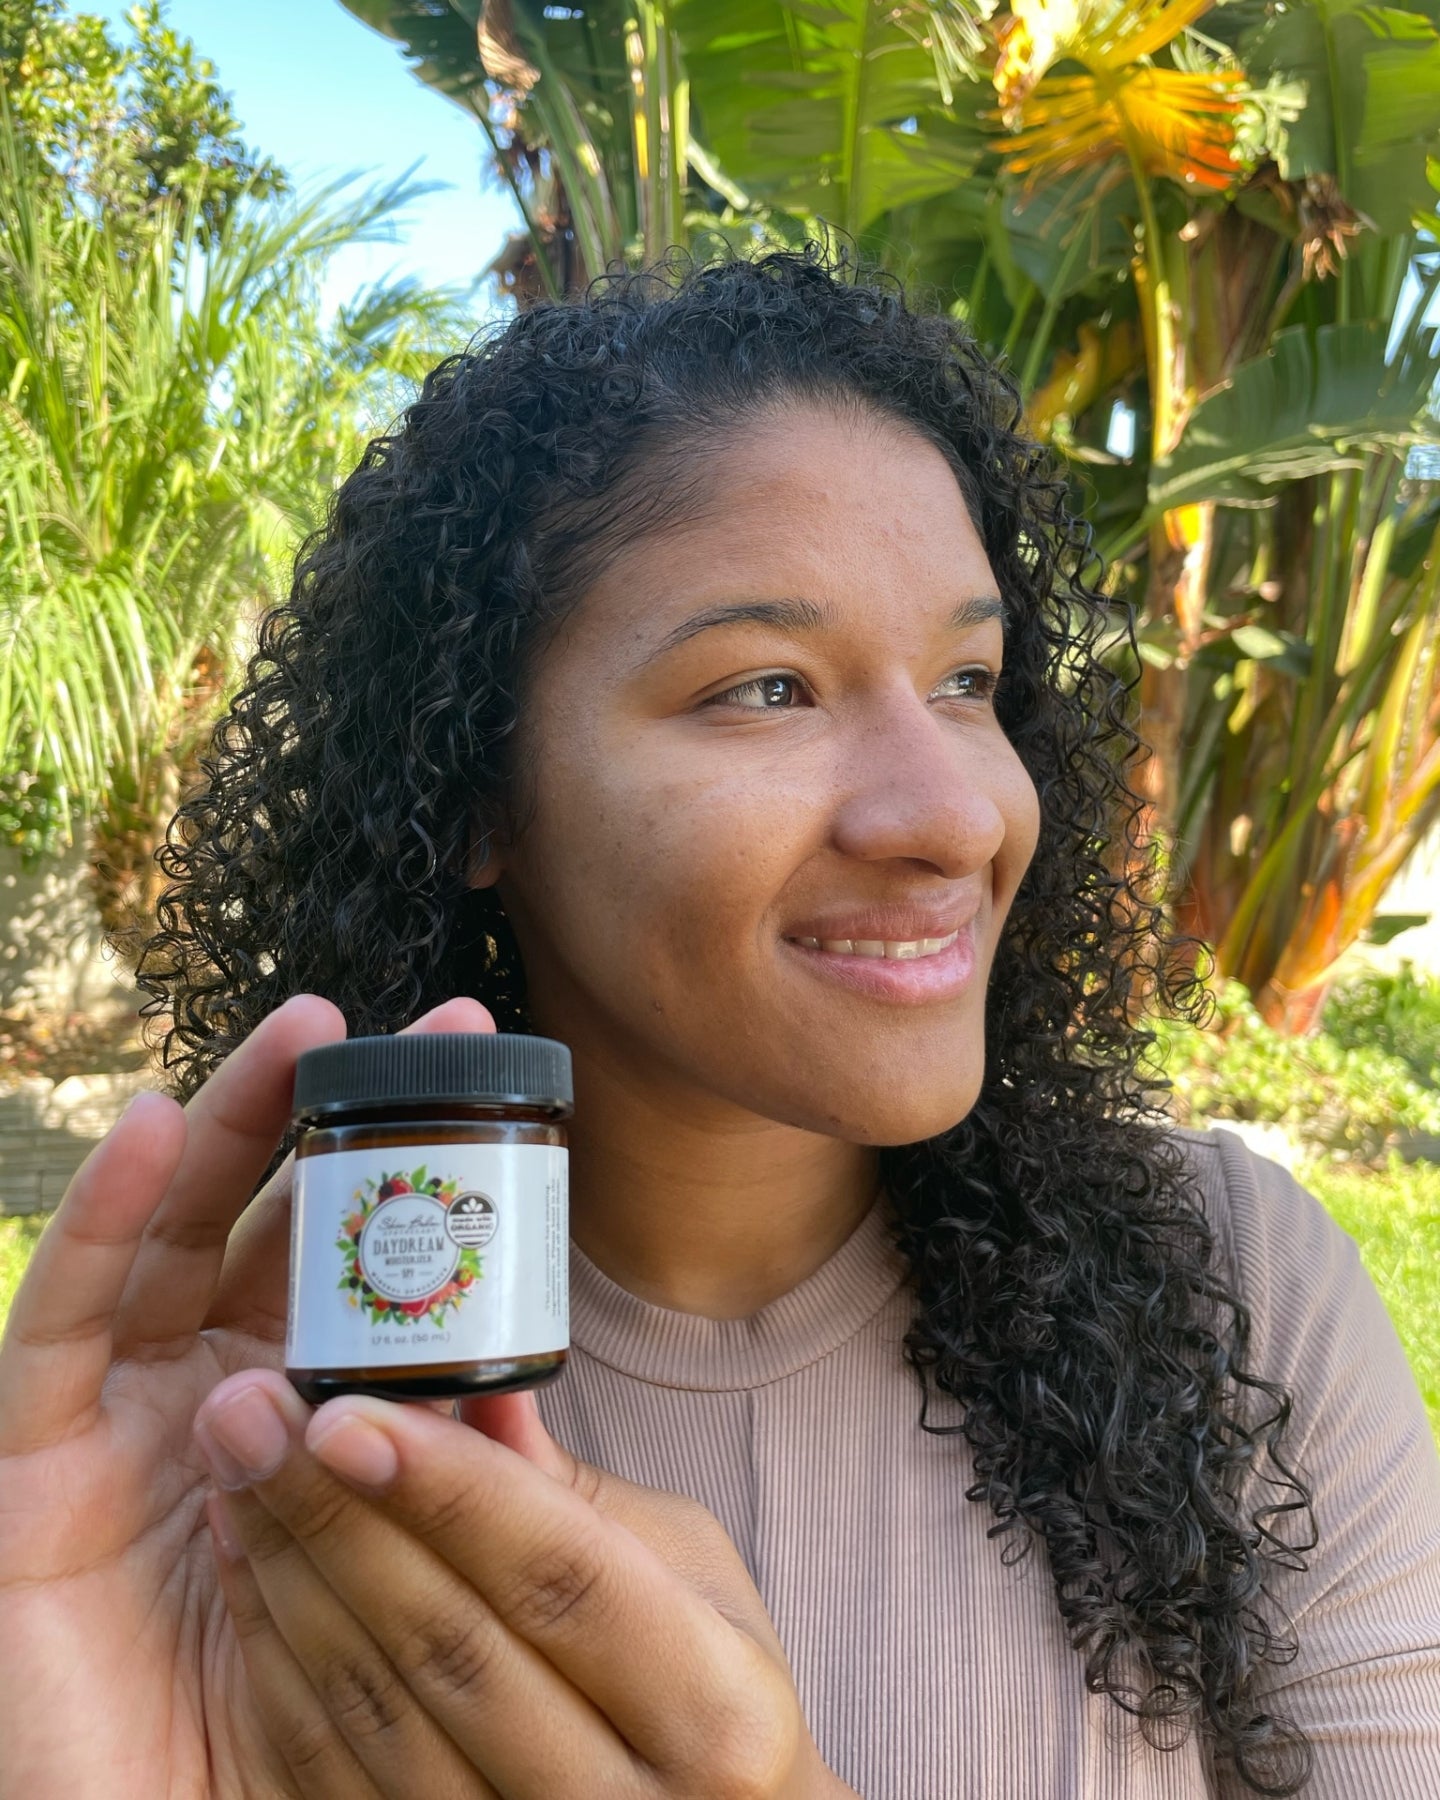 A smiling woman holds a jar of Daydream Mineral Sunscreen.